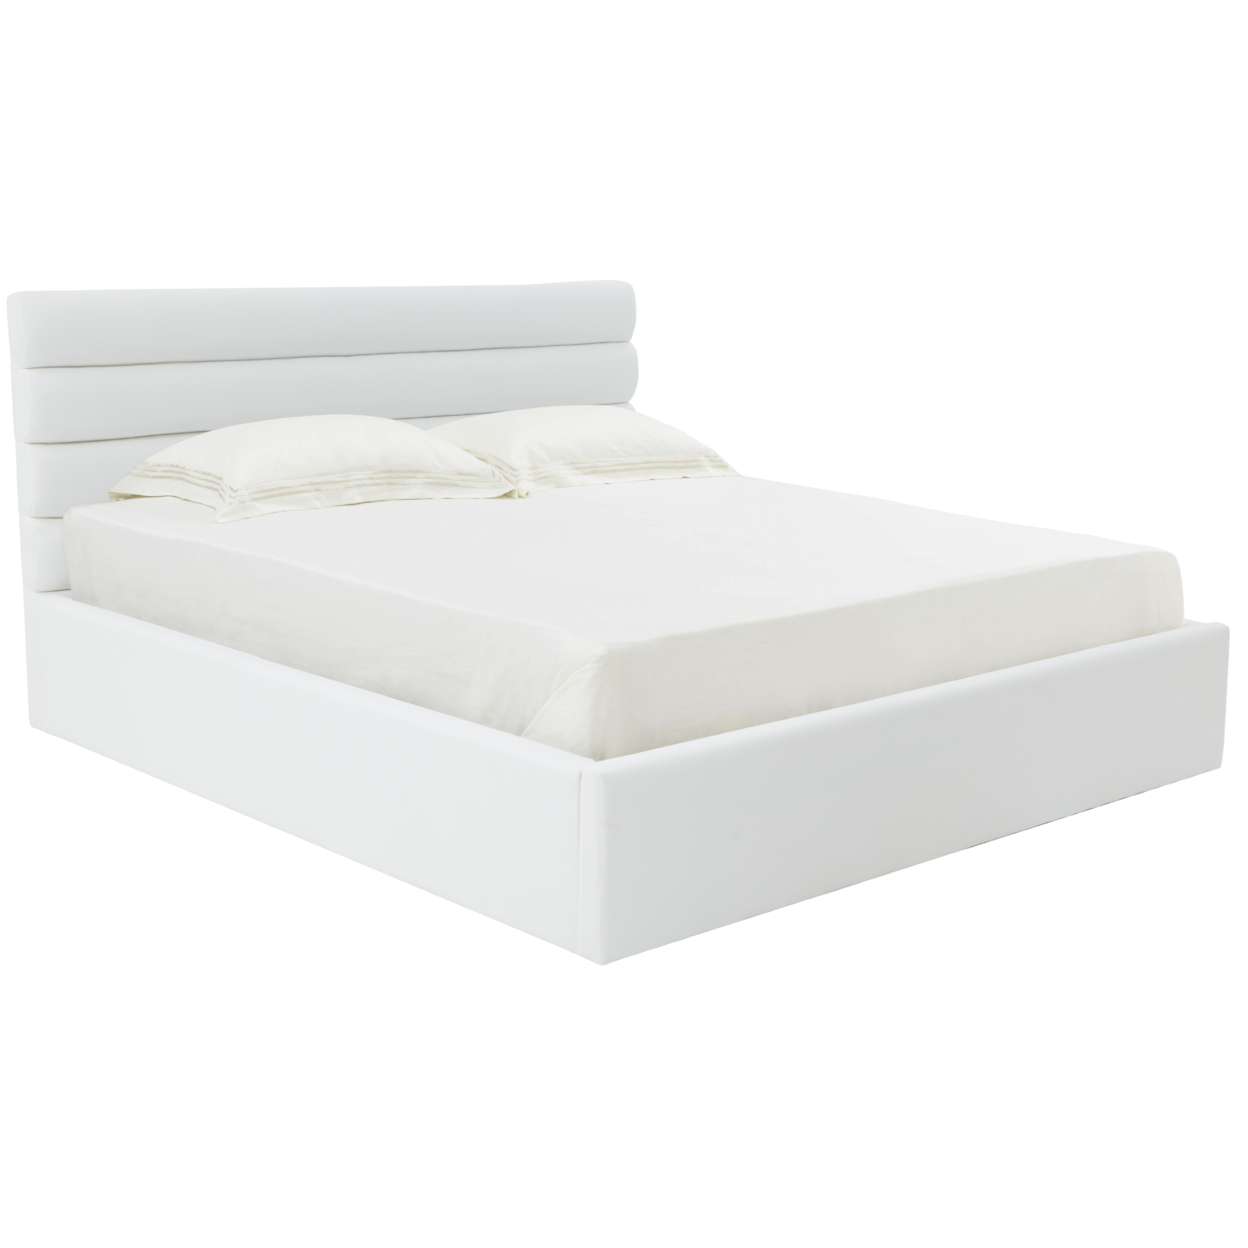 SAFAVIEH COUTURE JAYBELLA LOWPROFILE TUFTED BED Ivory